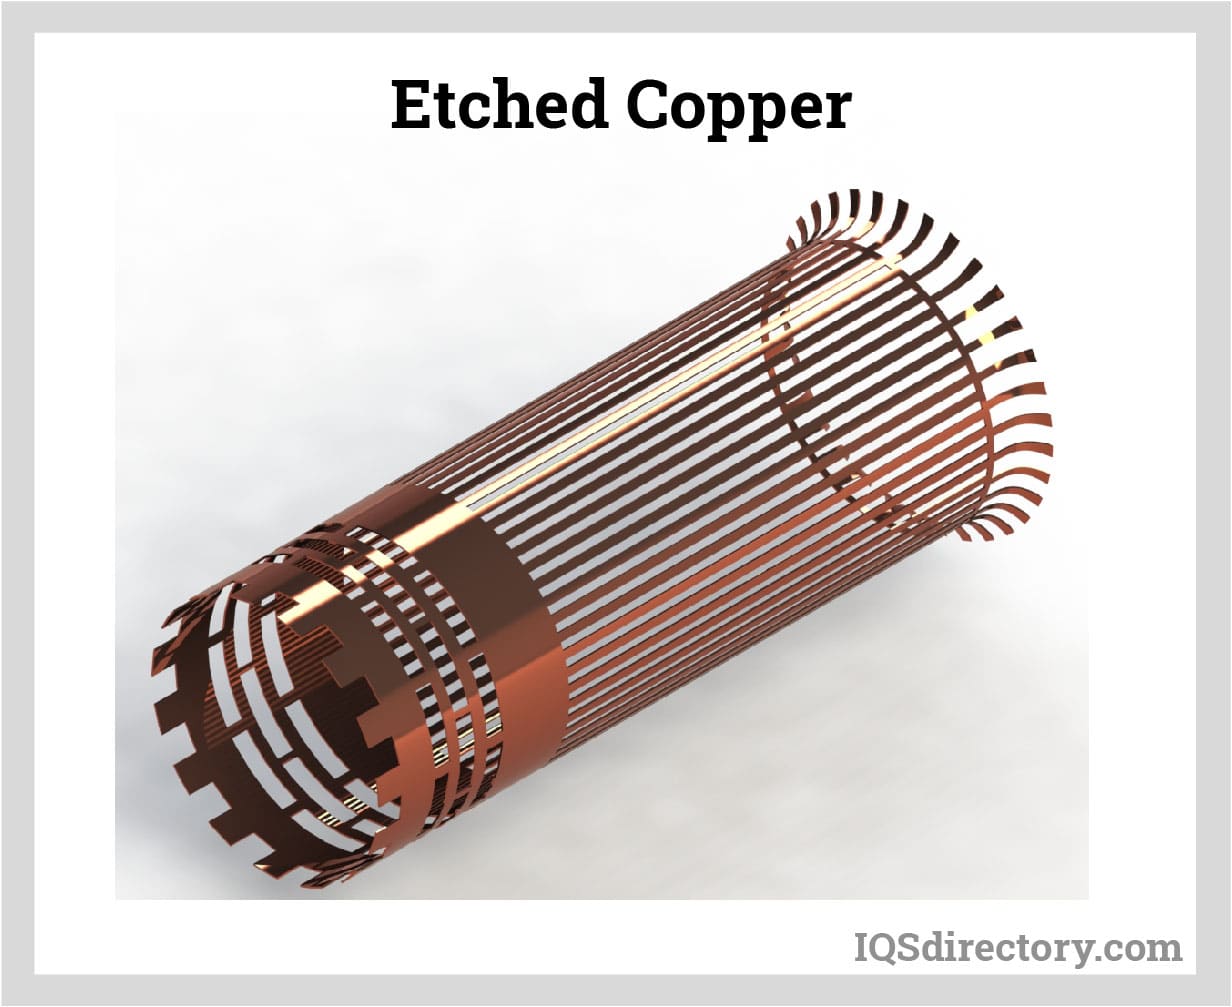 Etched Copper